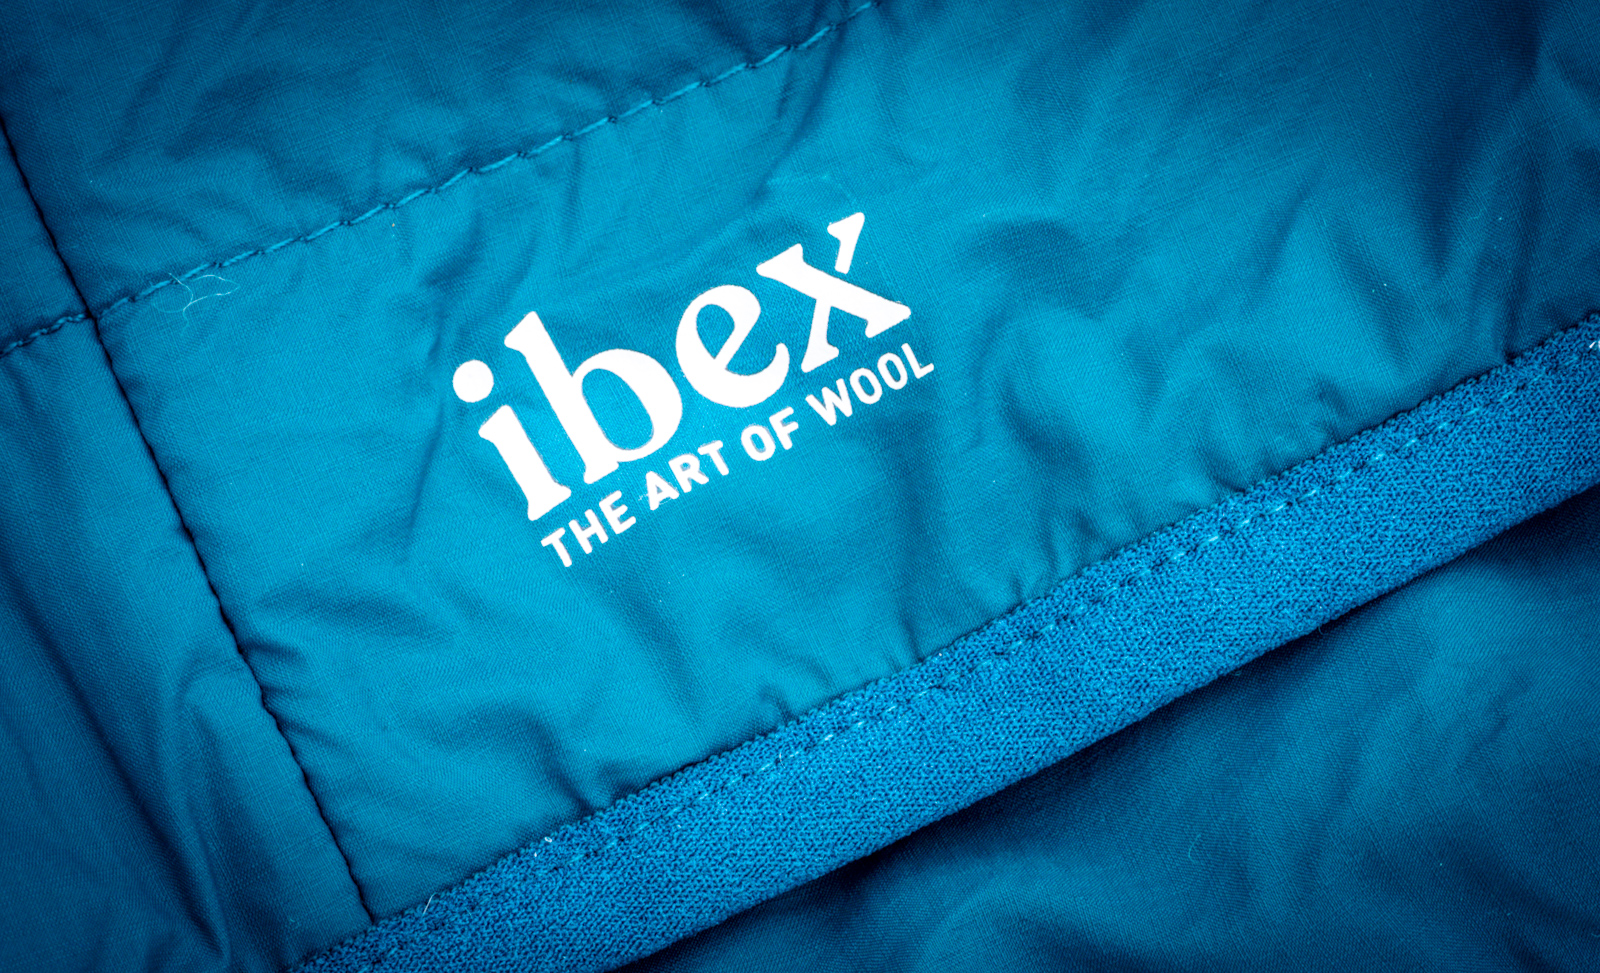 Ibex Wool Aire